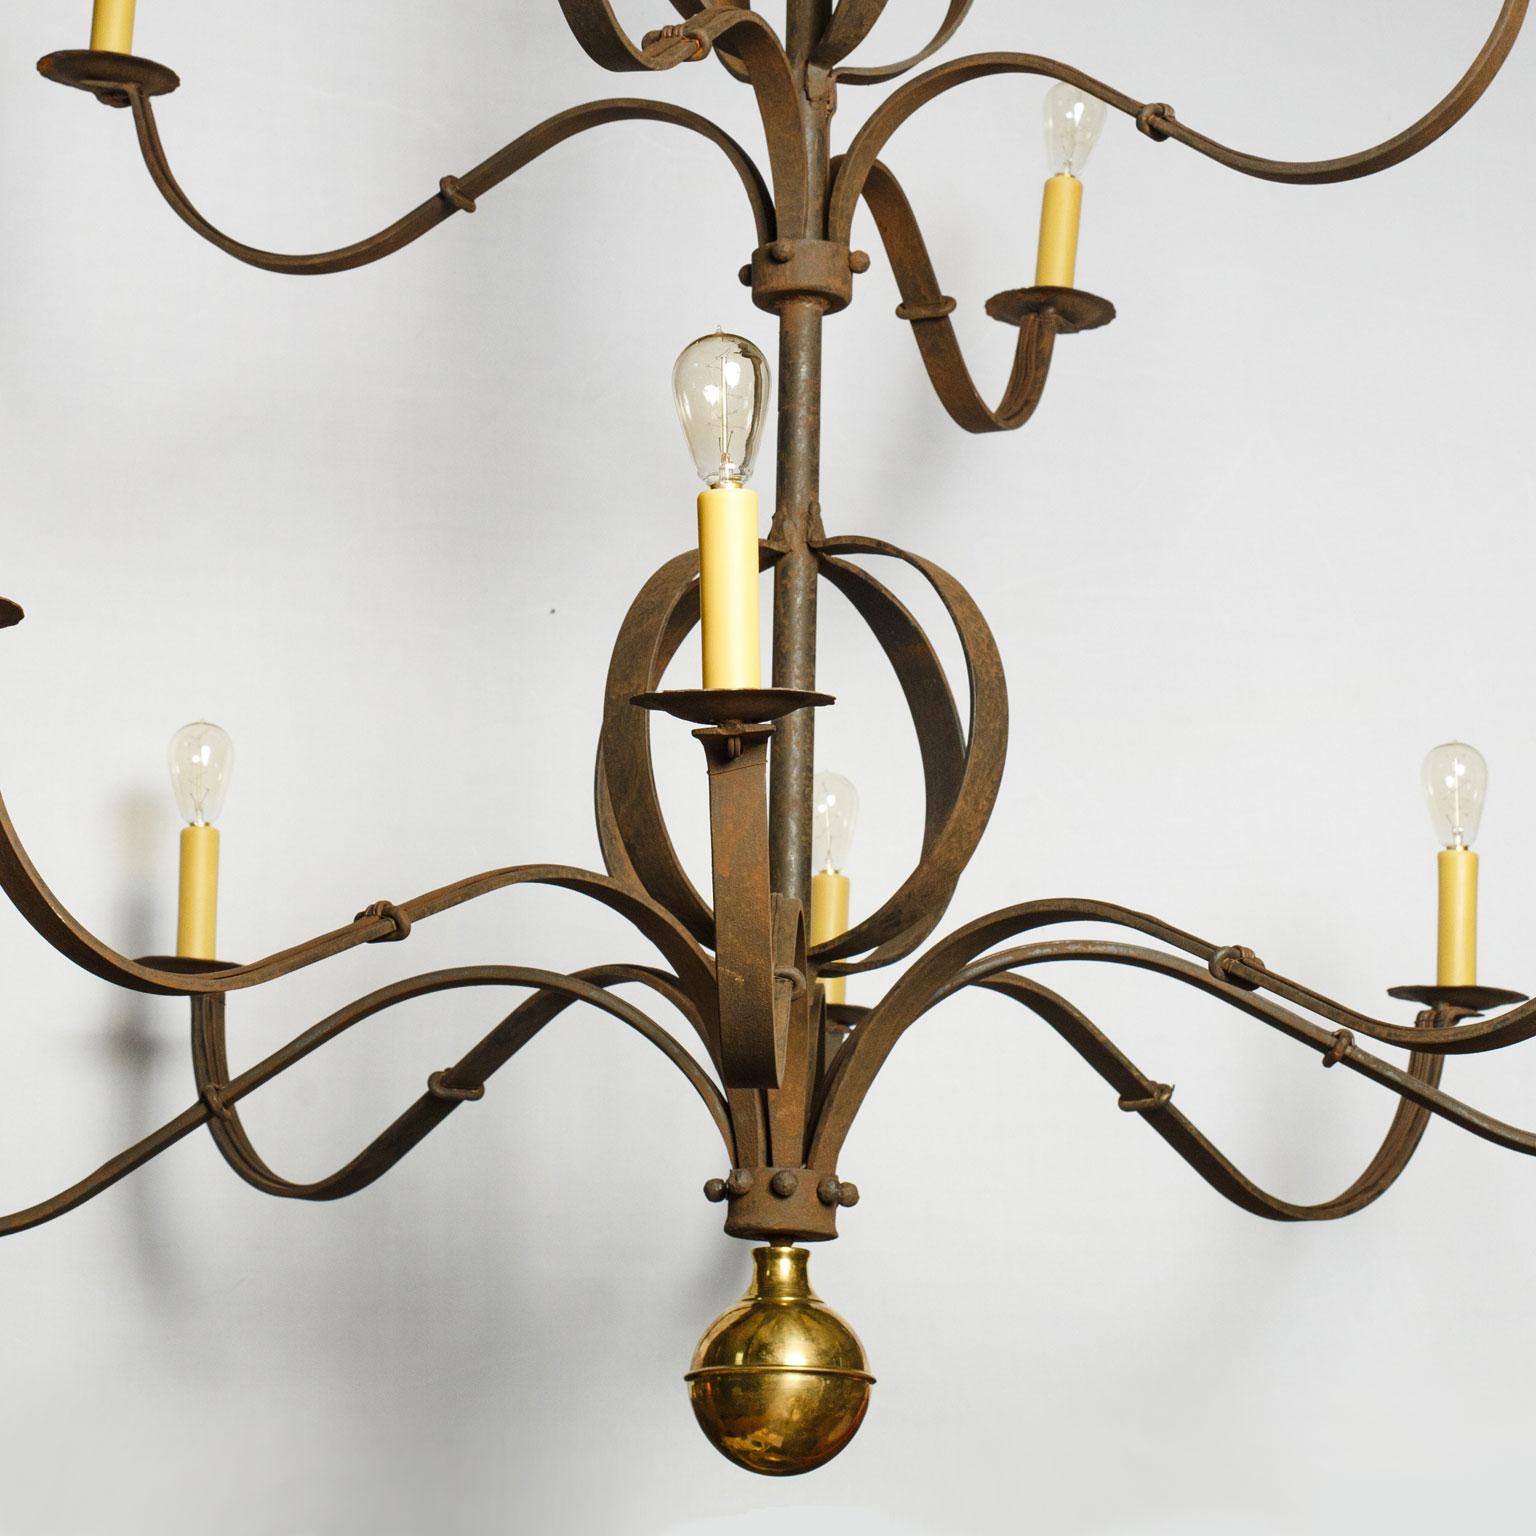 Monumental forged iron chandelier decorated with polished brass finial. Massive iron chandelier hand forged by blacksmith. Its attractive subtly-aged finish serves as the perfect contrast with its polished brass finial detail. Ten arms (four upper